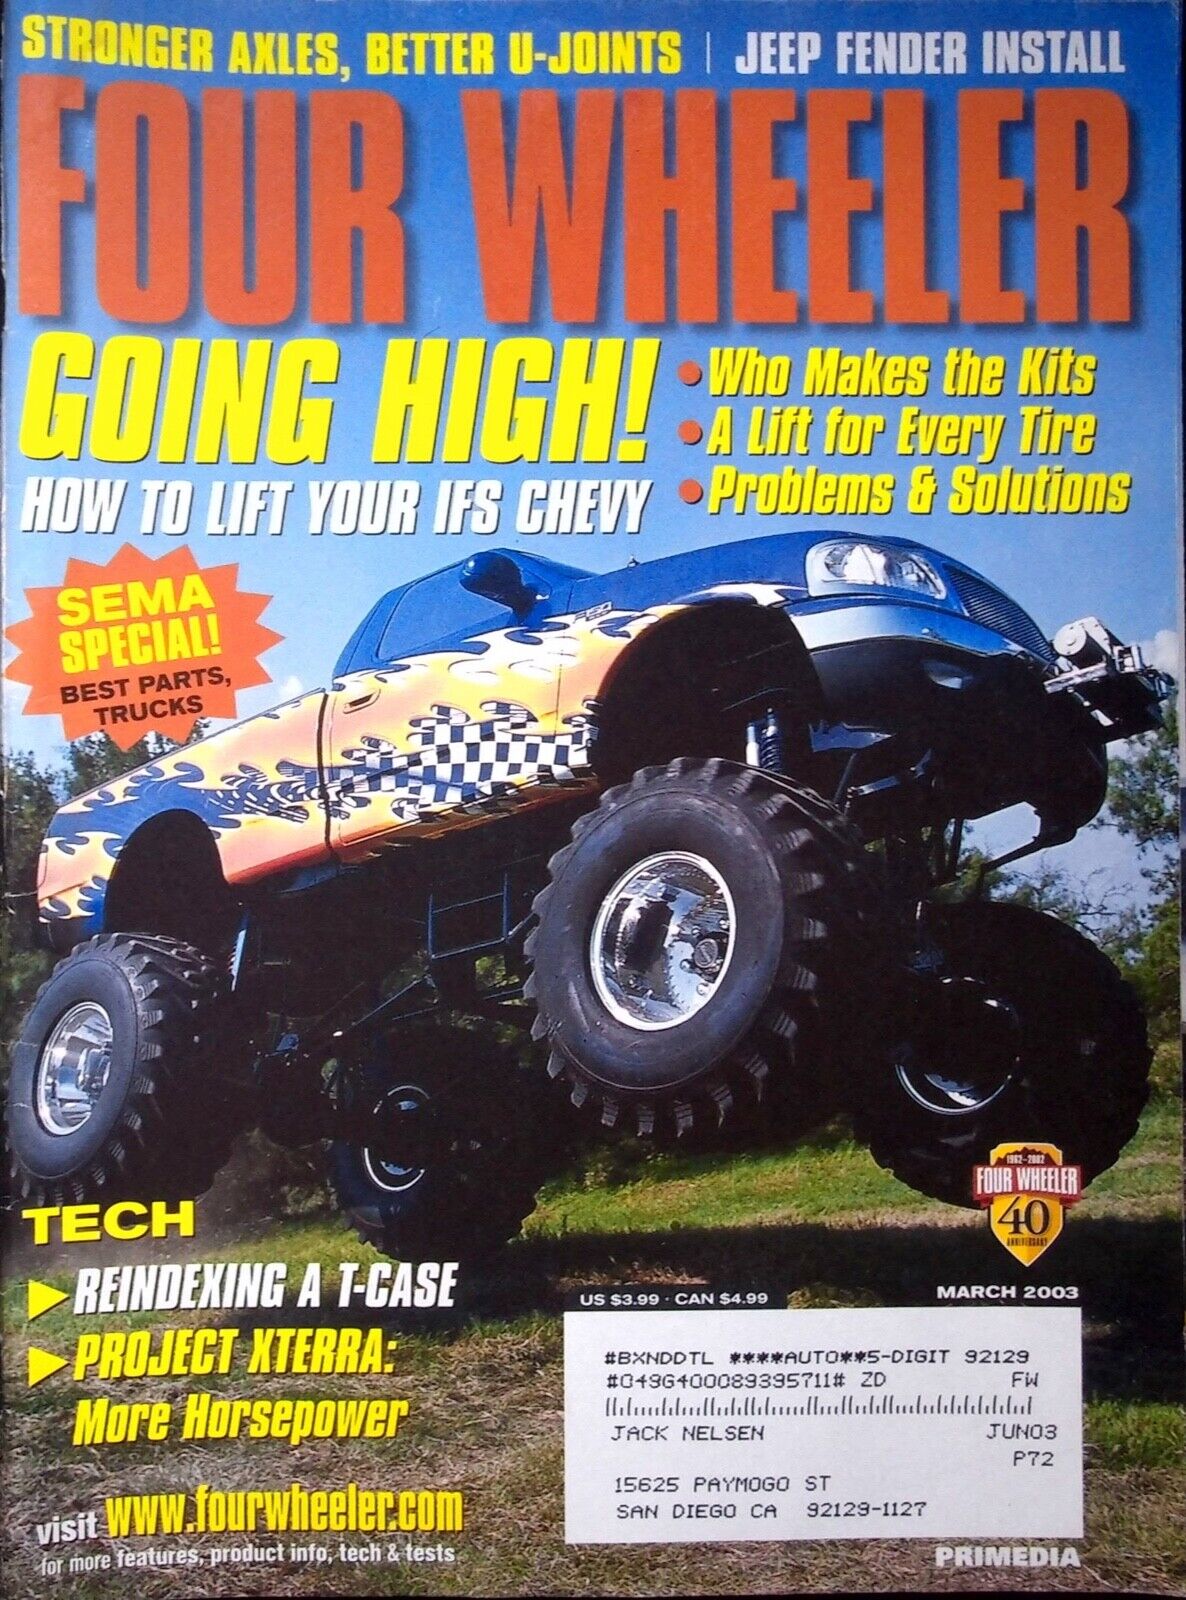 HOW TO LIFT YOUR CHEVY - FOUR WHEELER MAGAZINE, MARCH 2003 VOL. 40, NO. 03